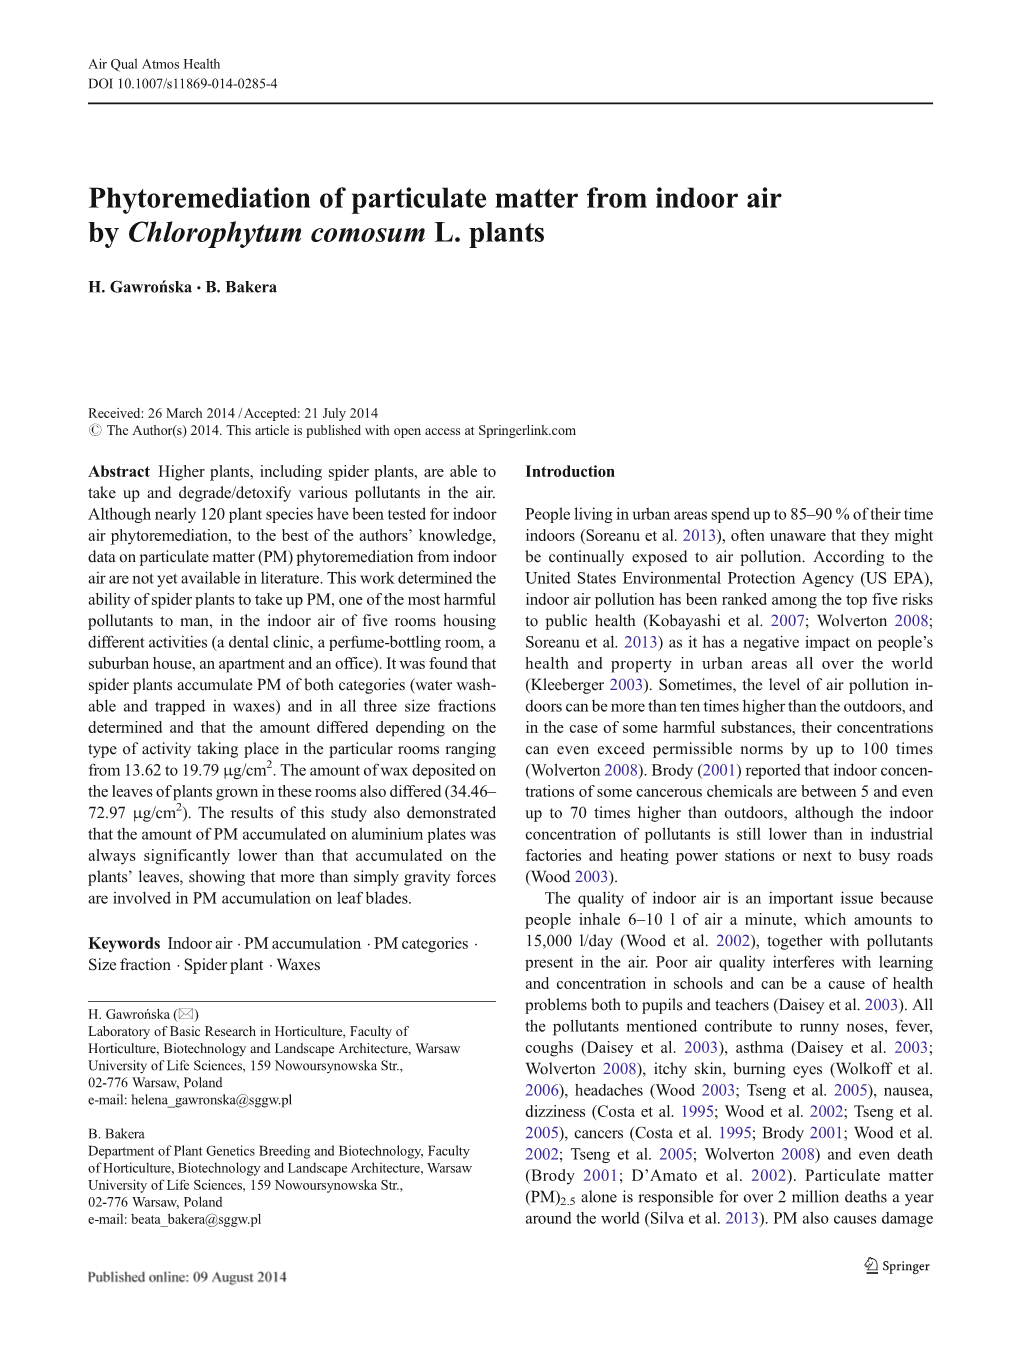 Phytoremediation of Particulate Matter from Indoor Air by Chlorophytum Comosum L. Plants